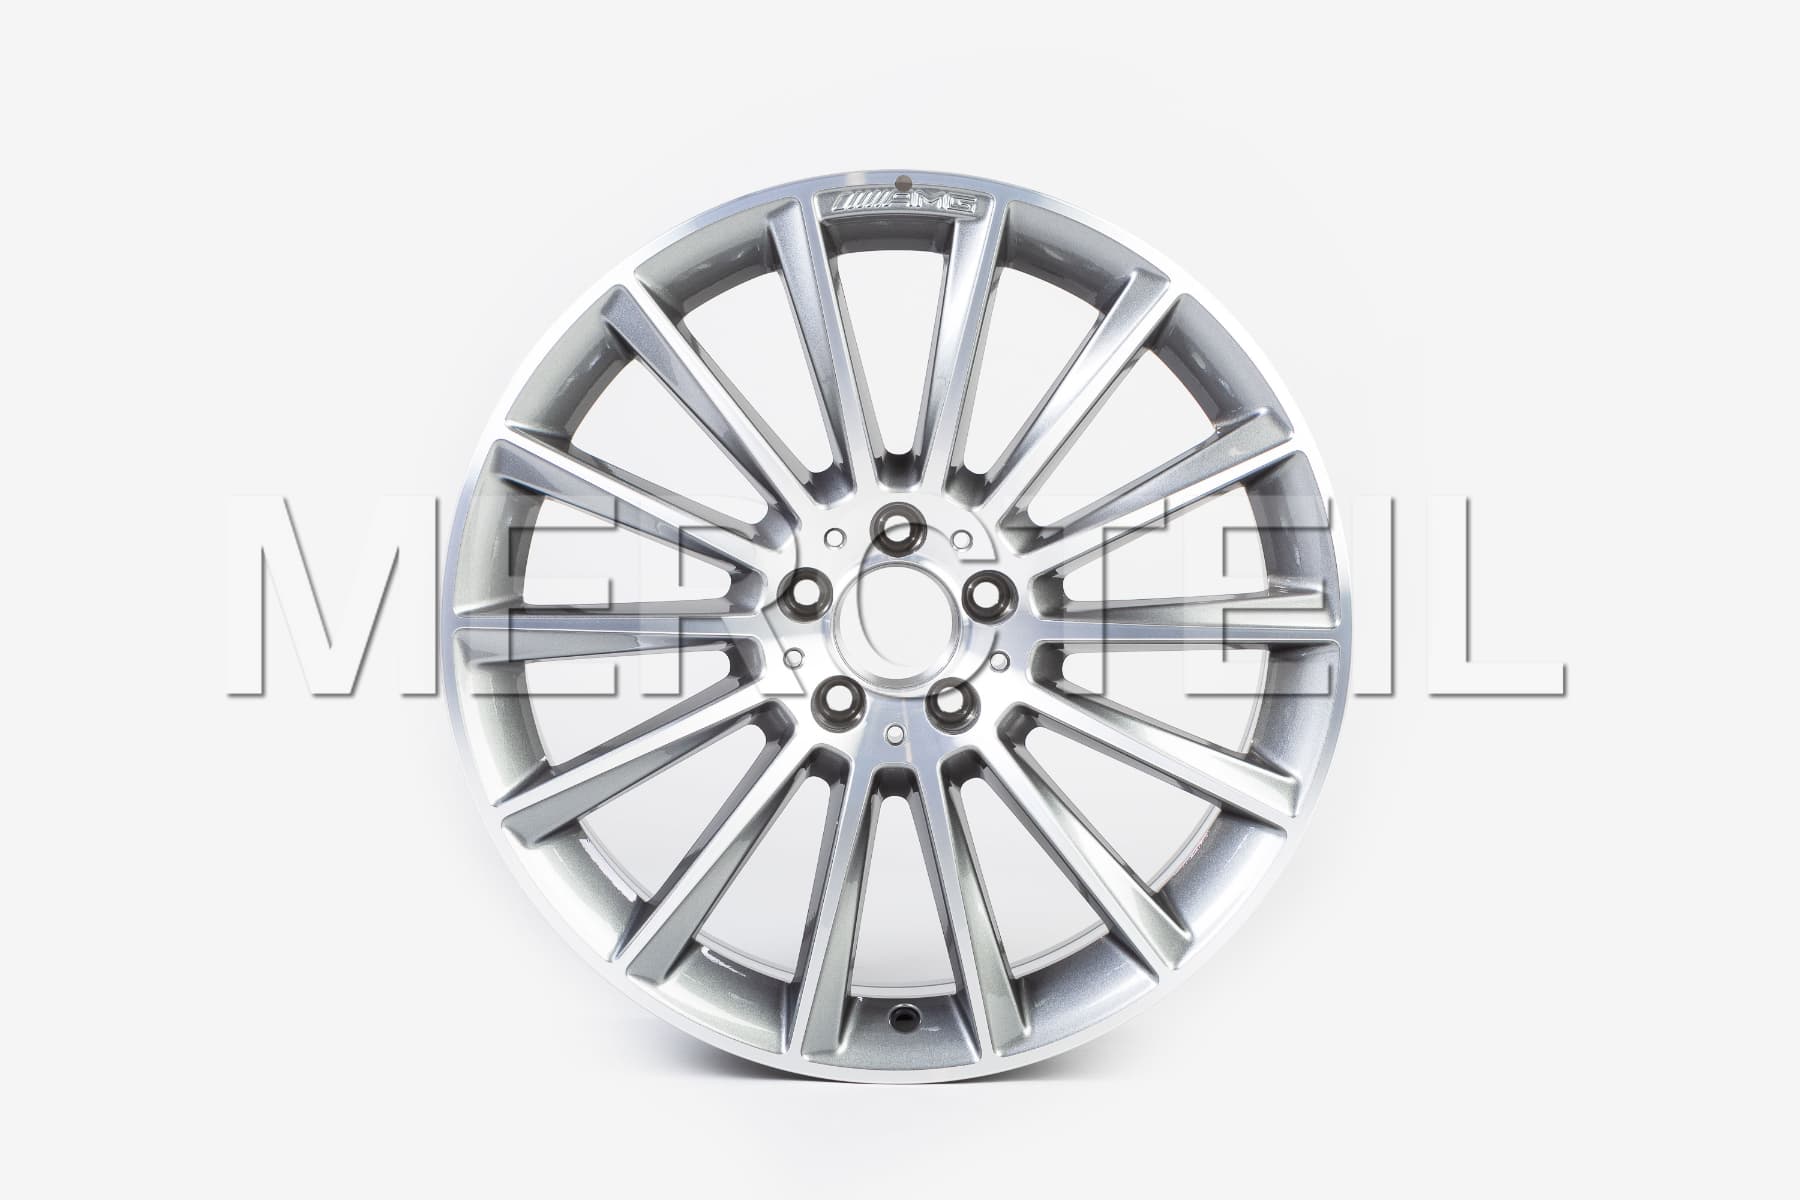 E Class AMG Wheels Alloy 20 Inch Genuine Mercedes Benz (part number: A21340122007X21)